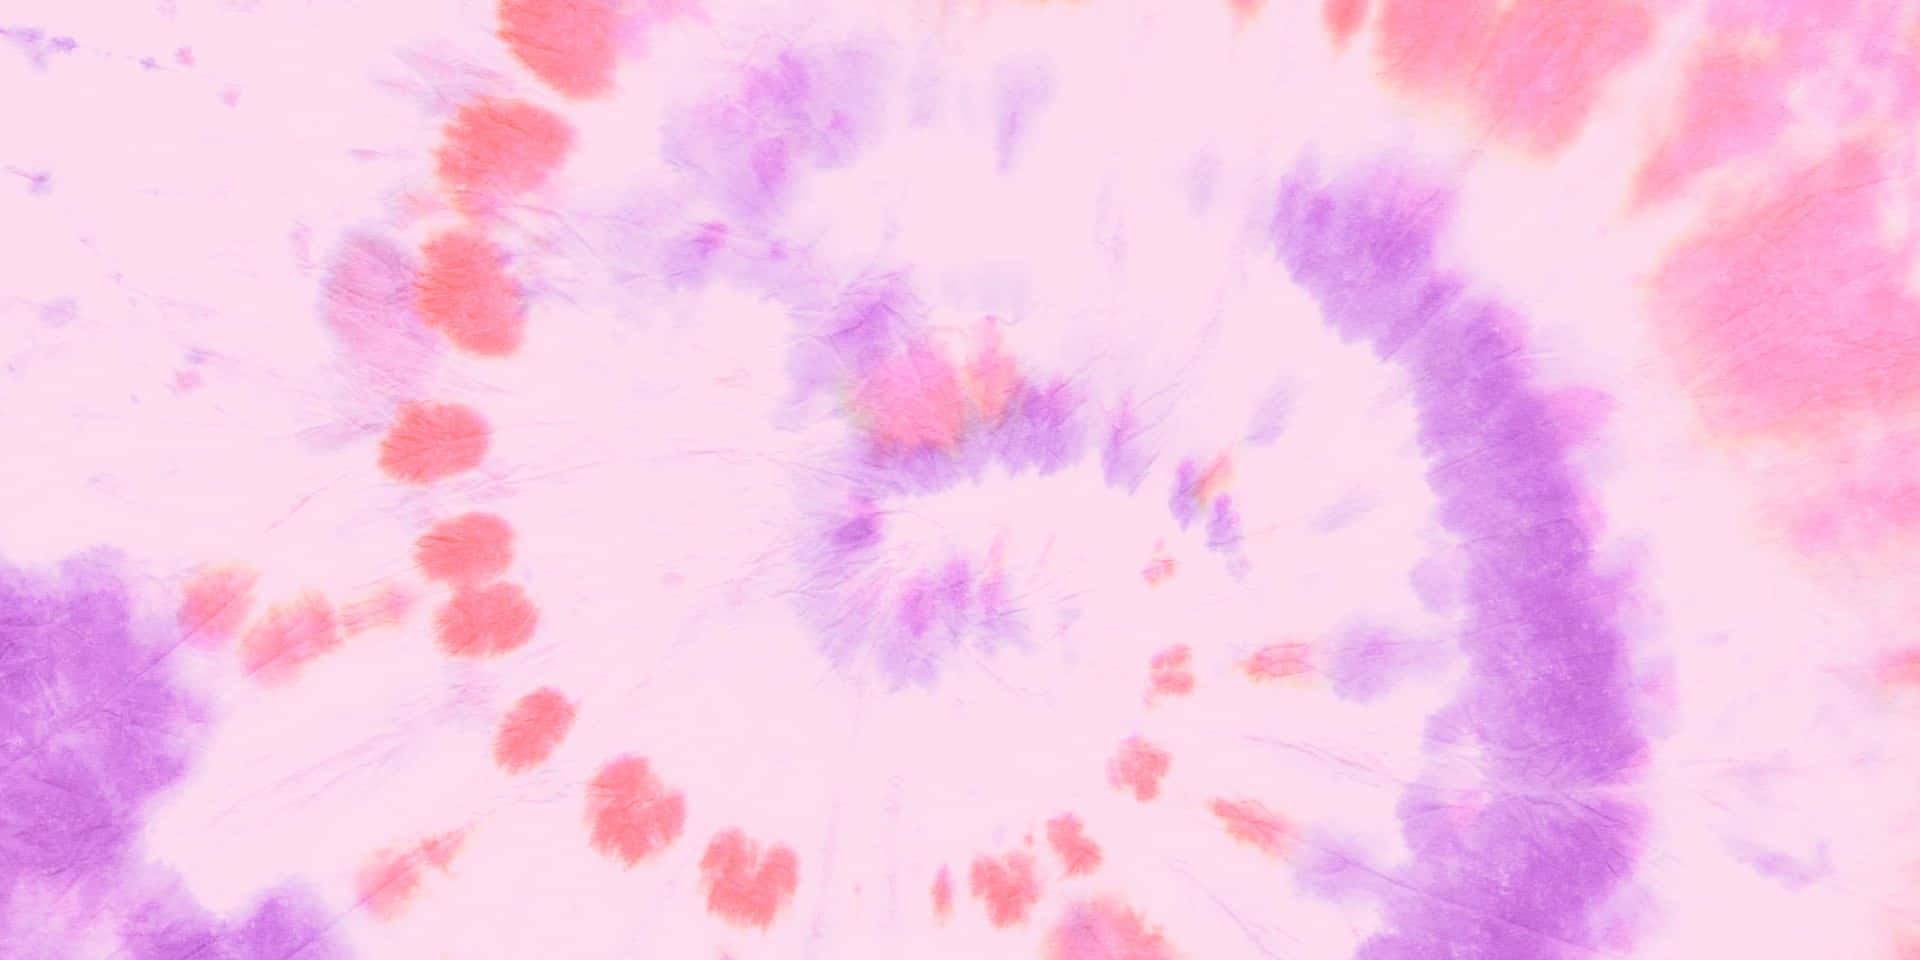 Brighten up your wardrobe and home décor with this beautiful pink tie dye pattern!